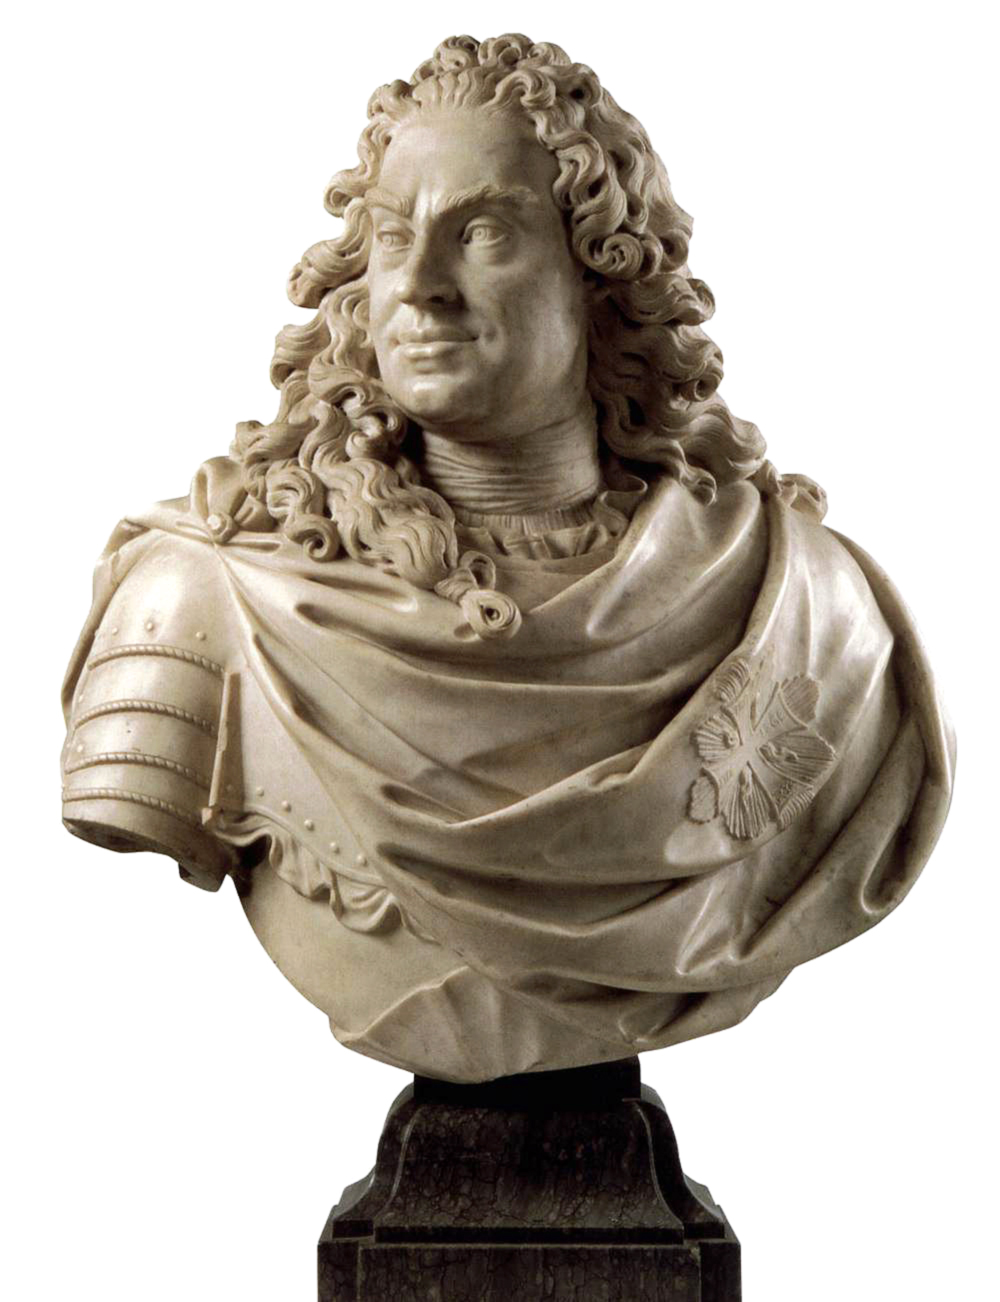 A photograph of a sculpture of the head and chest of a man. The man has long curly which reaches to his shoulders. He wears a robe that has a cross on the right, and under it is a metal breast and should plate.